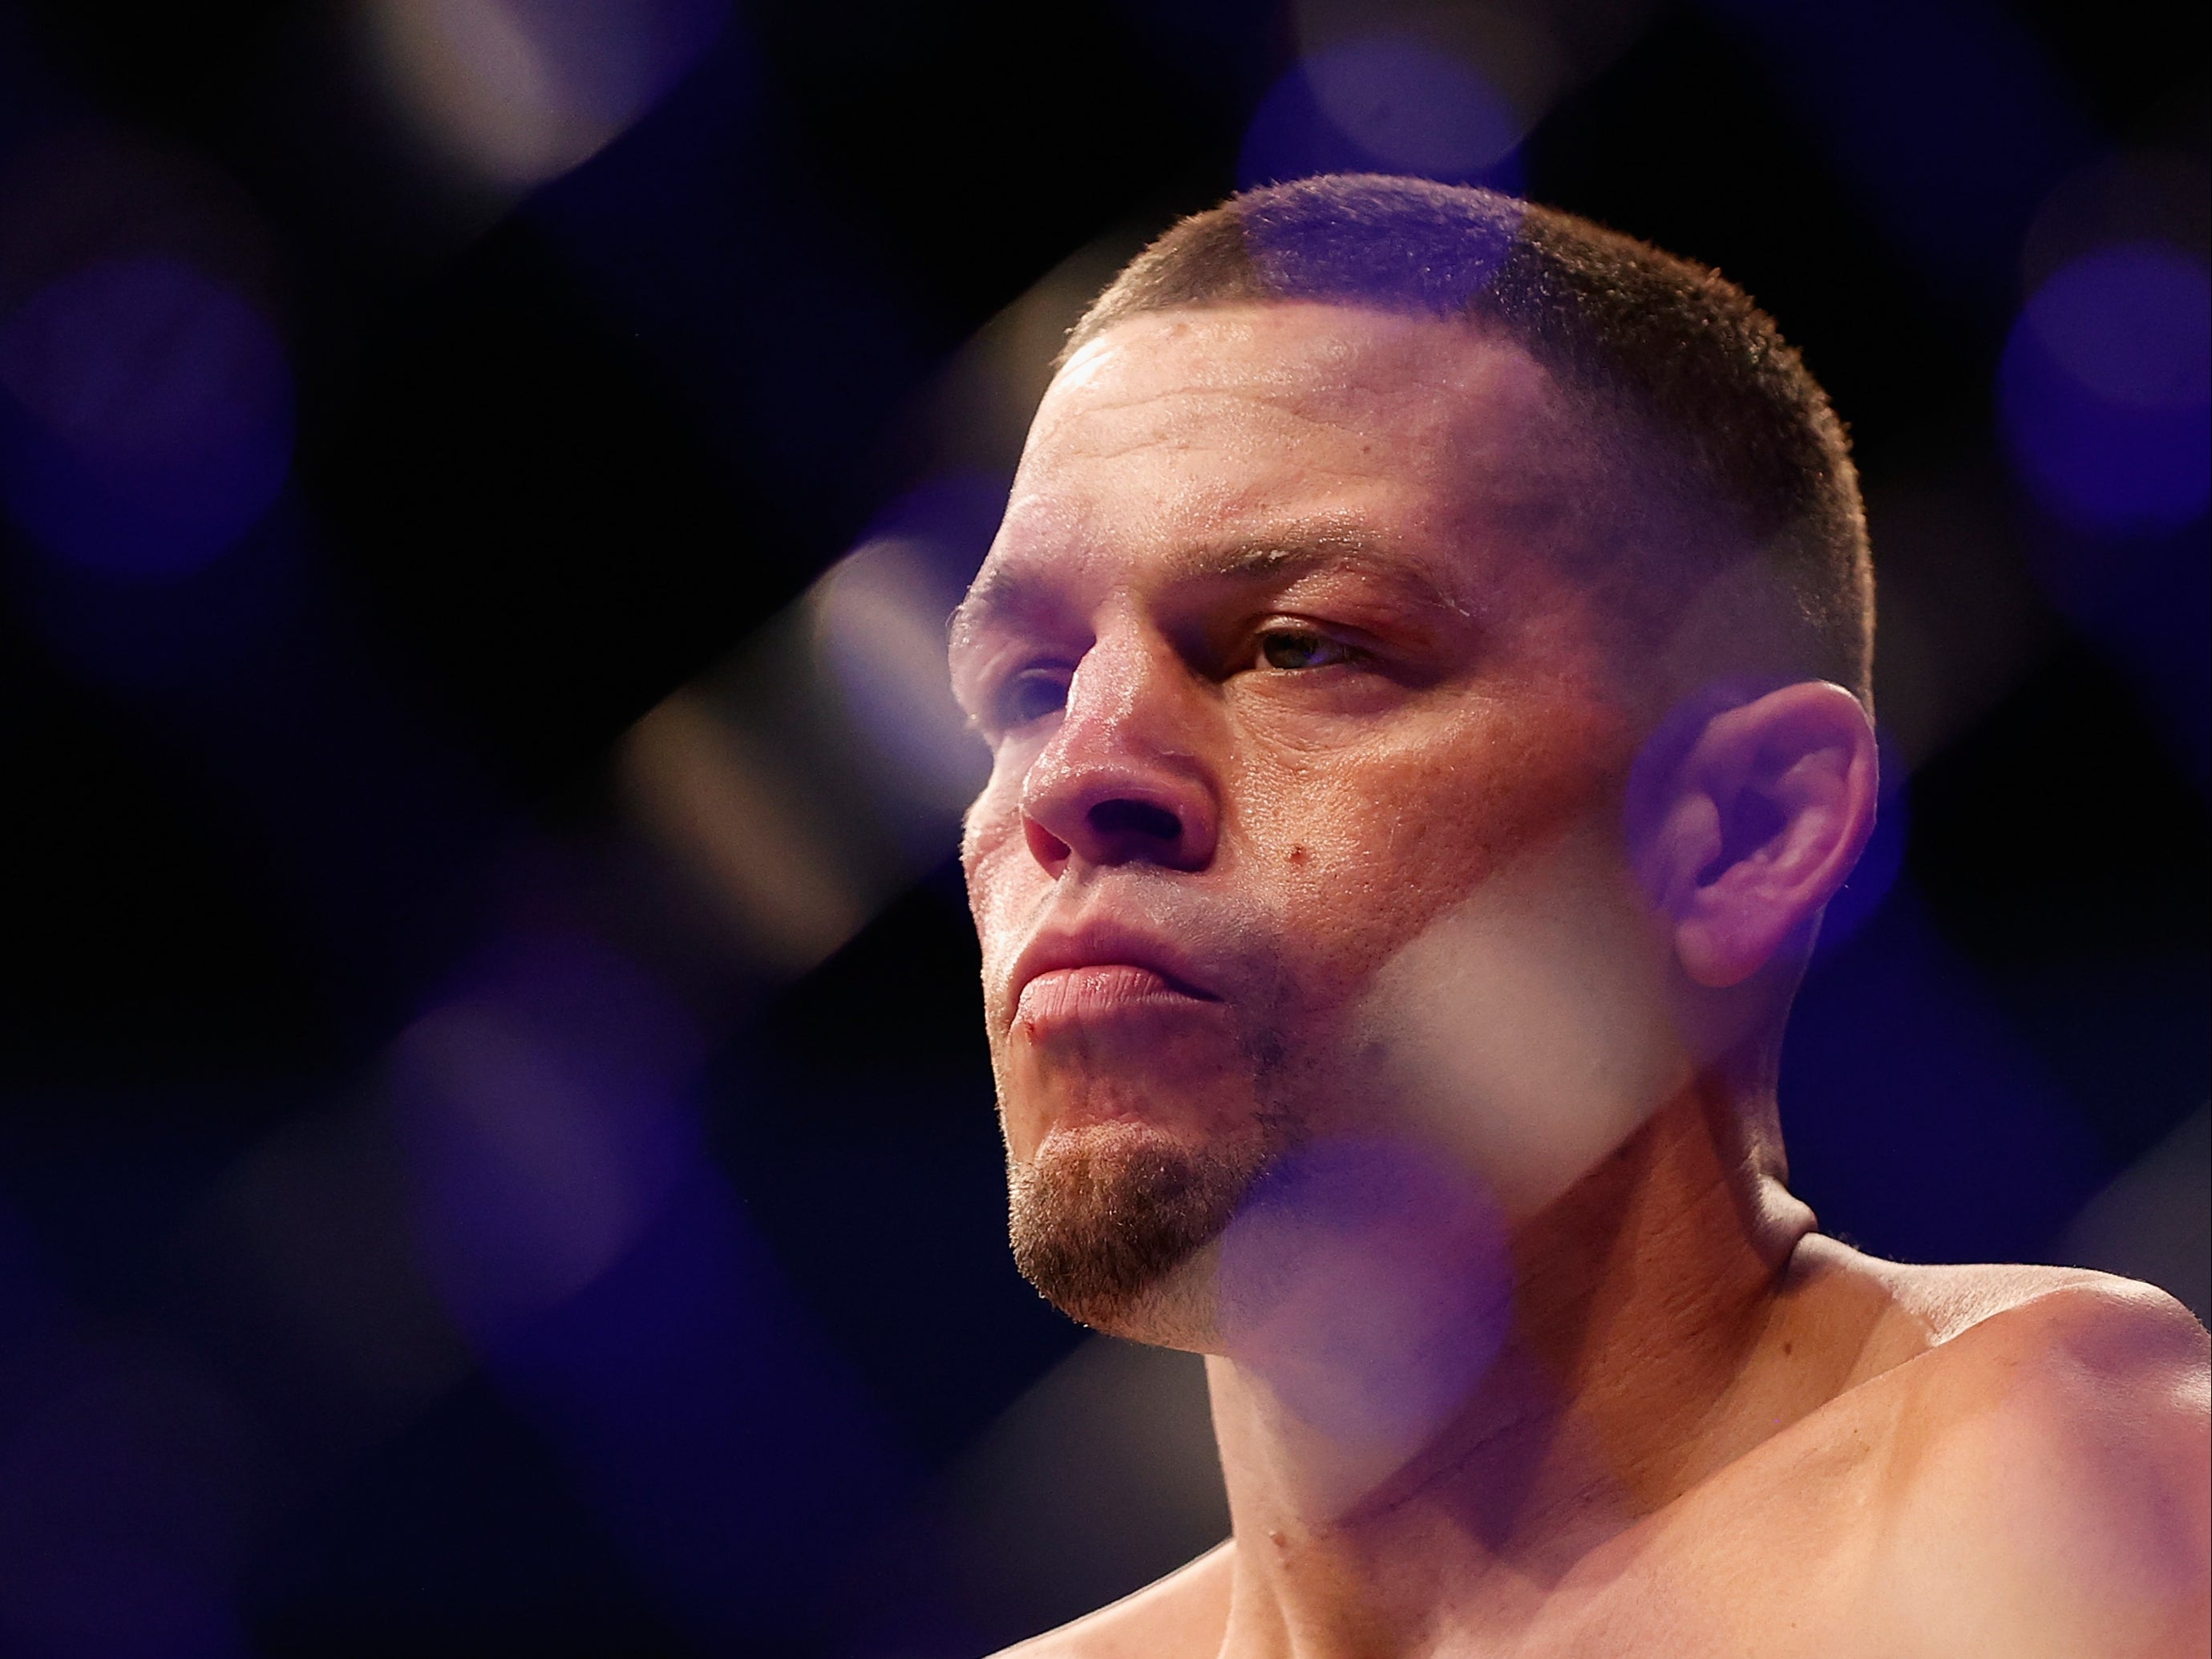 Diaz is an MMA free agent after a storied run in the UFC